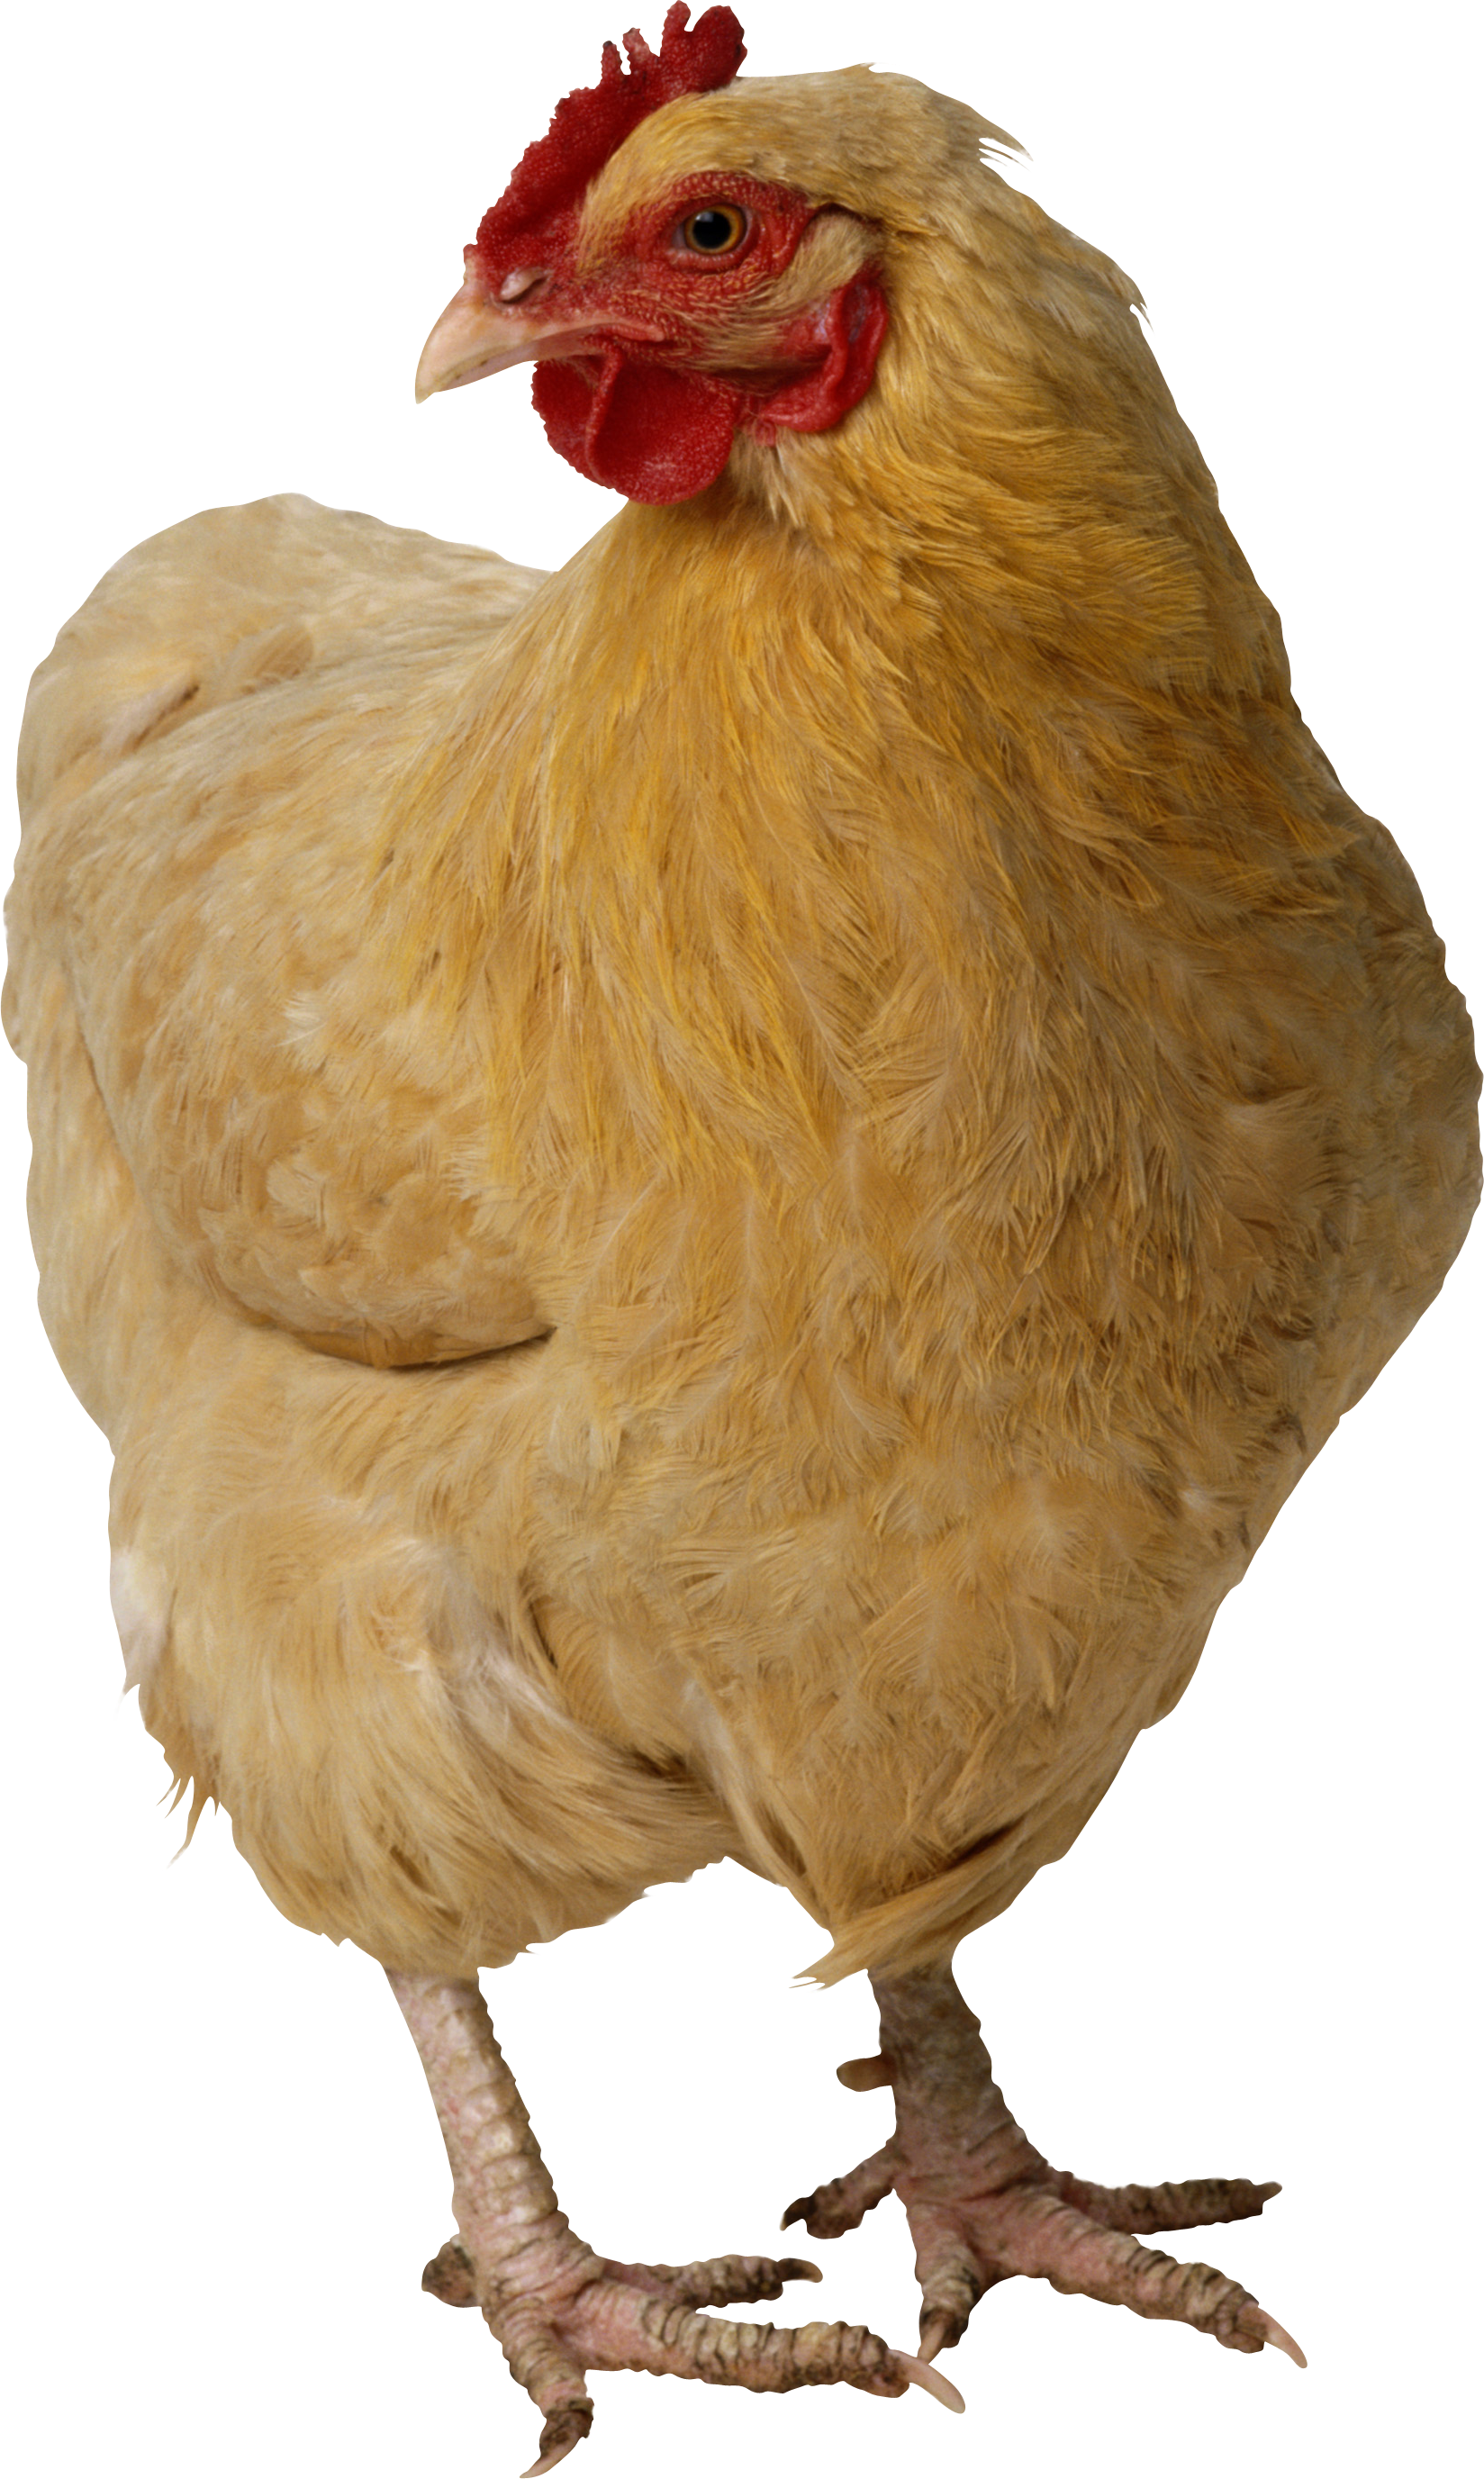 PNG HD Of Chickens - 148742